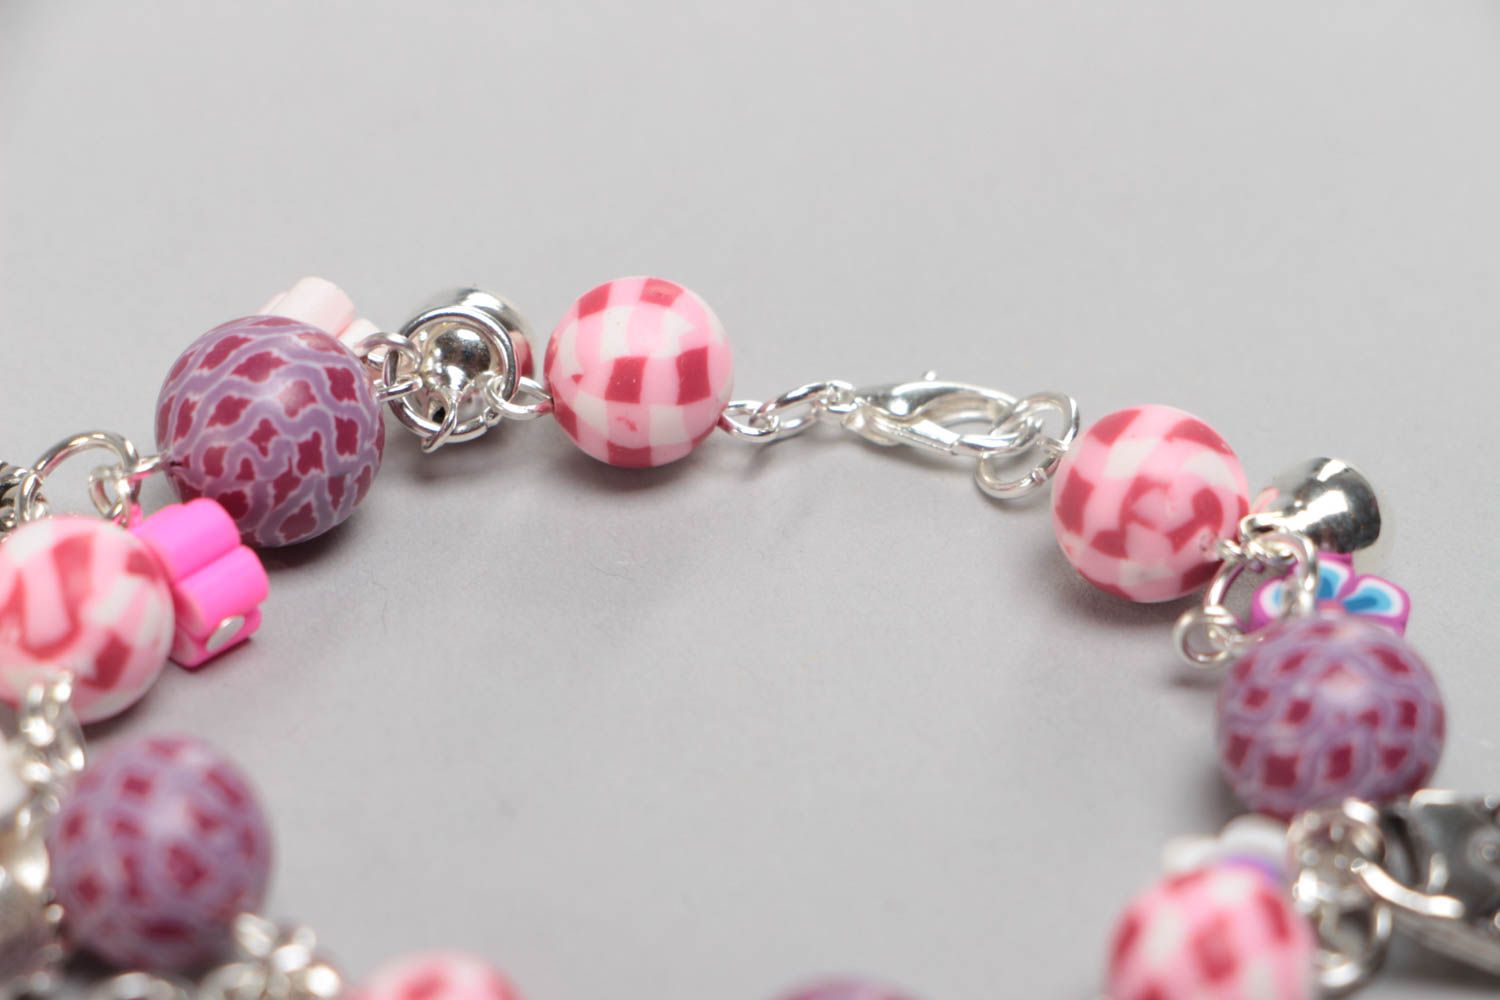 Handmade pink children's polymer clay wrist bracelet with charms photo 3